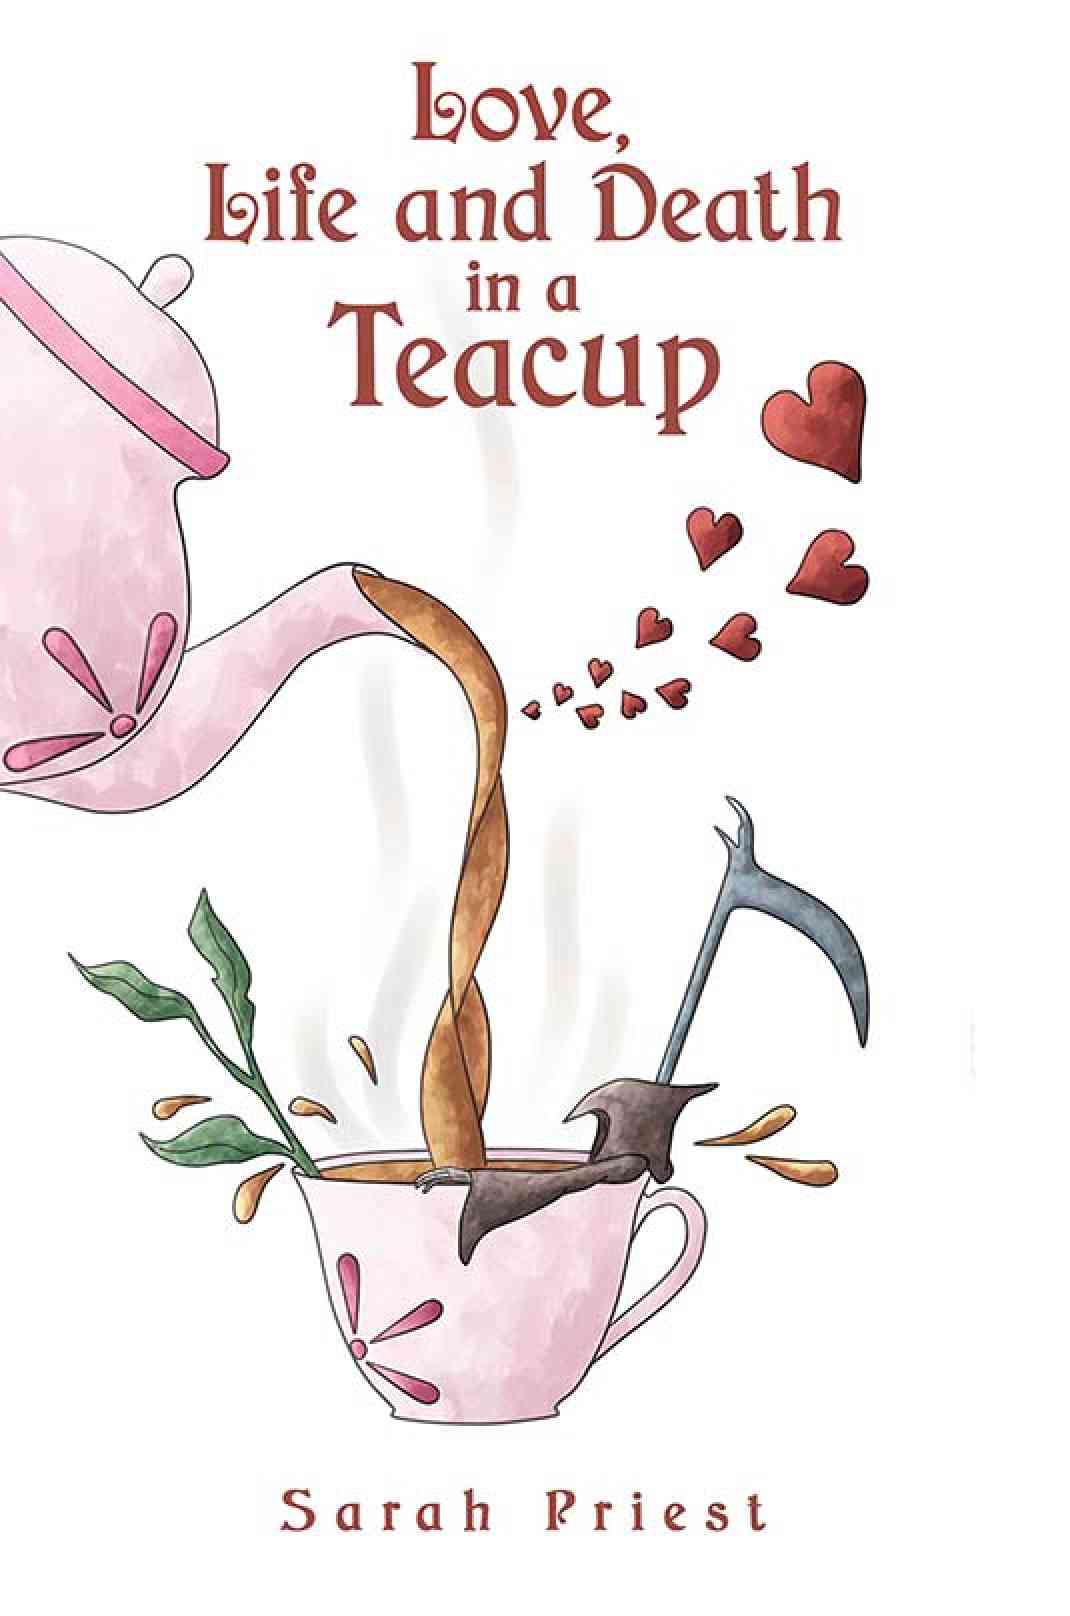 Blog Interview of Sarah Priest by Kate Kreates on book ‘Love, Life and Death in a Teacup’